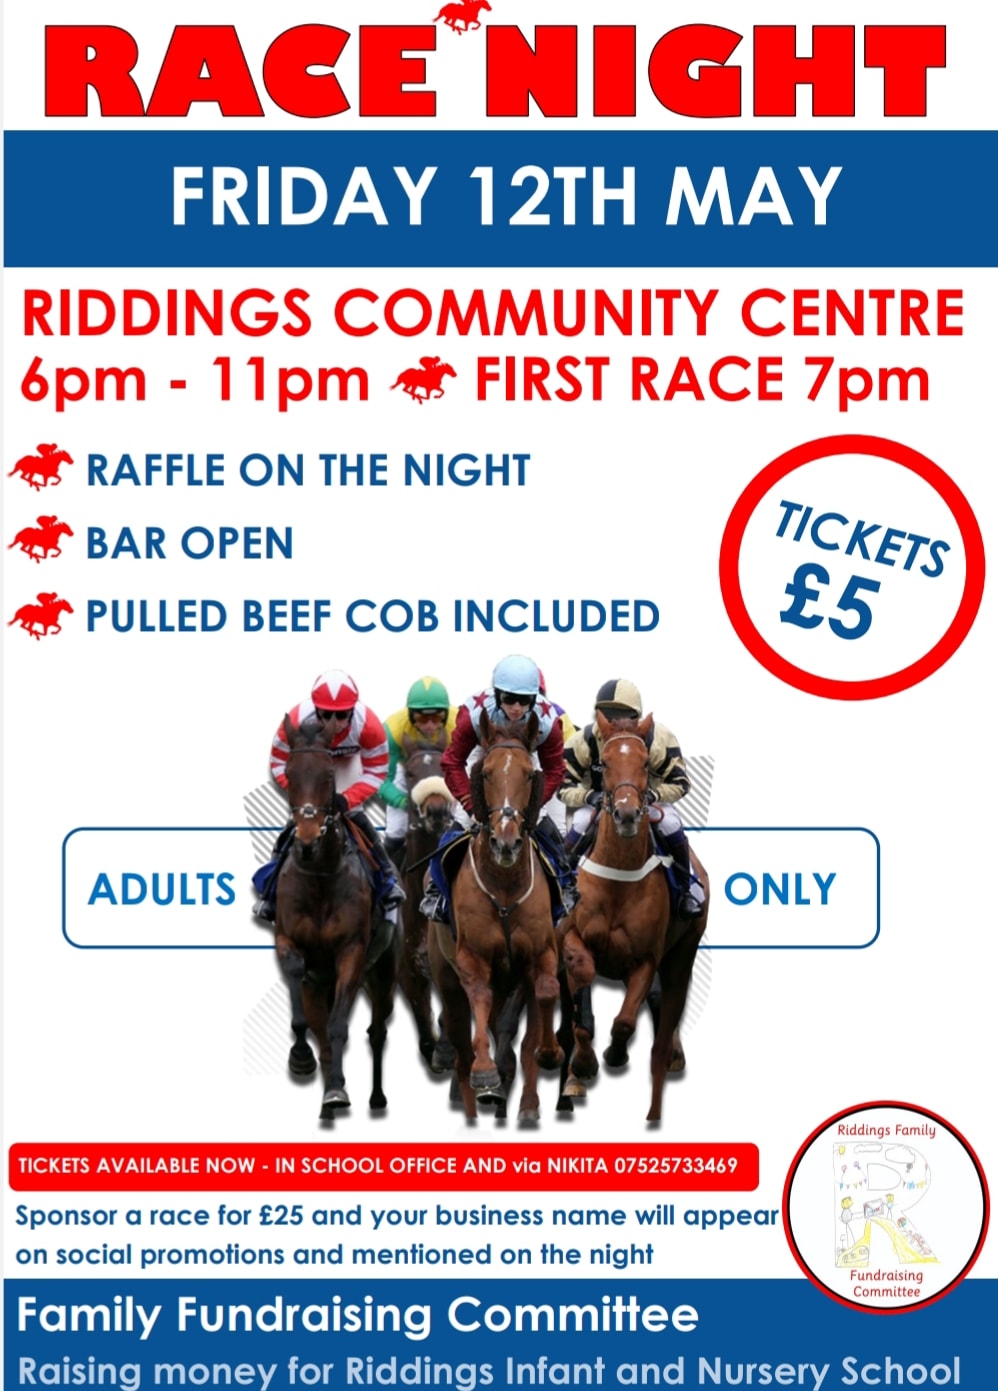 Race Night at Riddings Park Community Centre will raise money for Riddings Infant and Nursery School